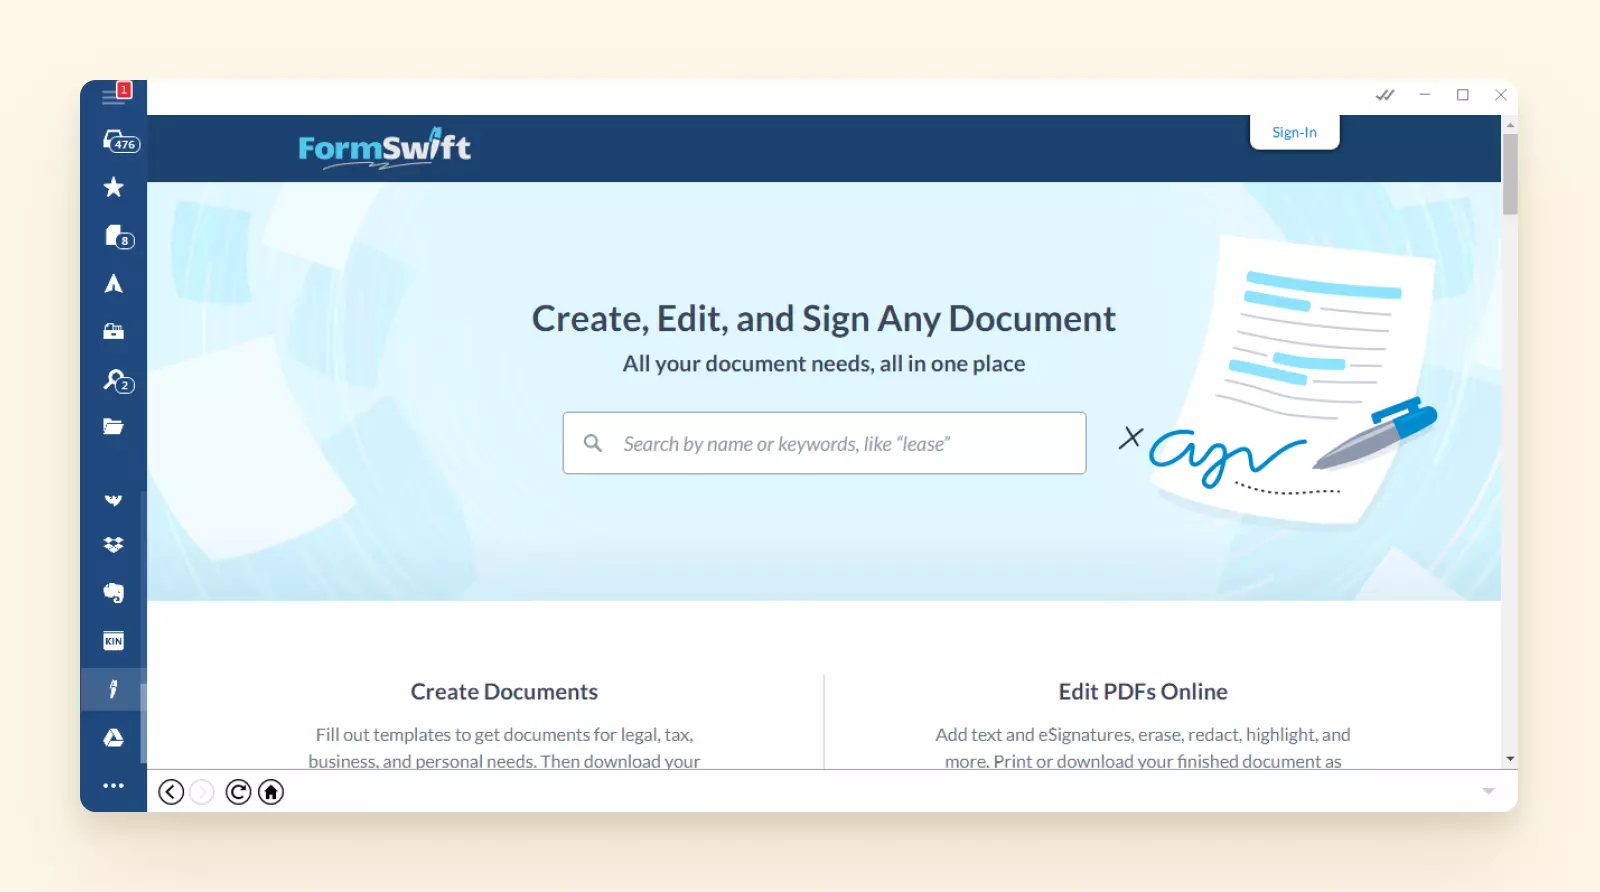 FormSwift homepage